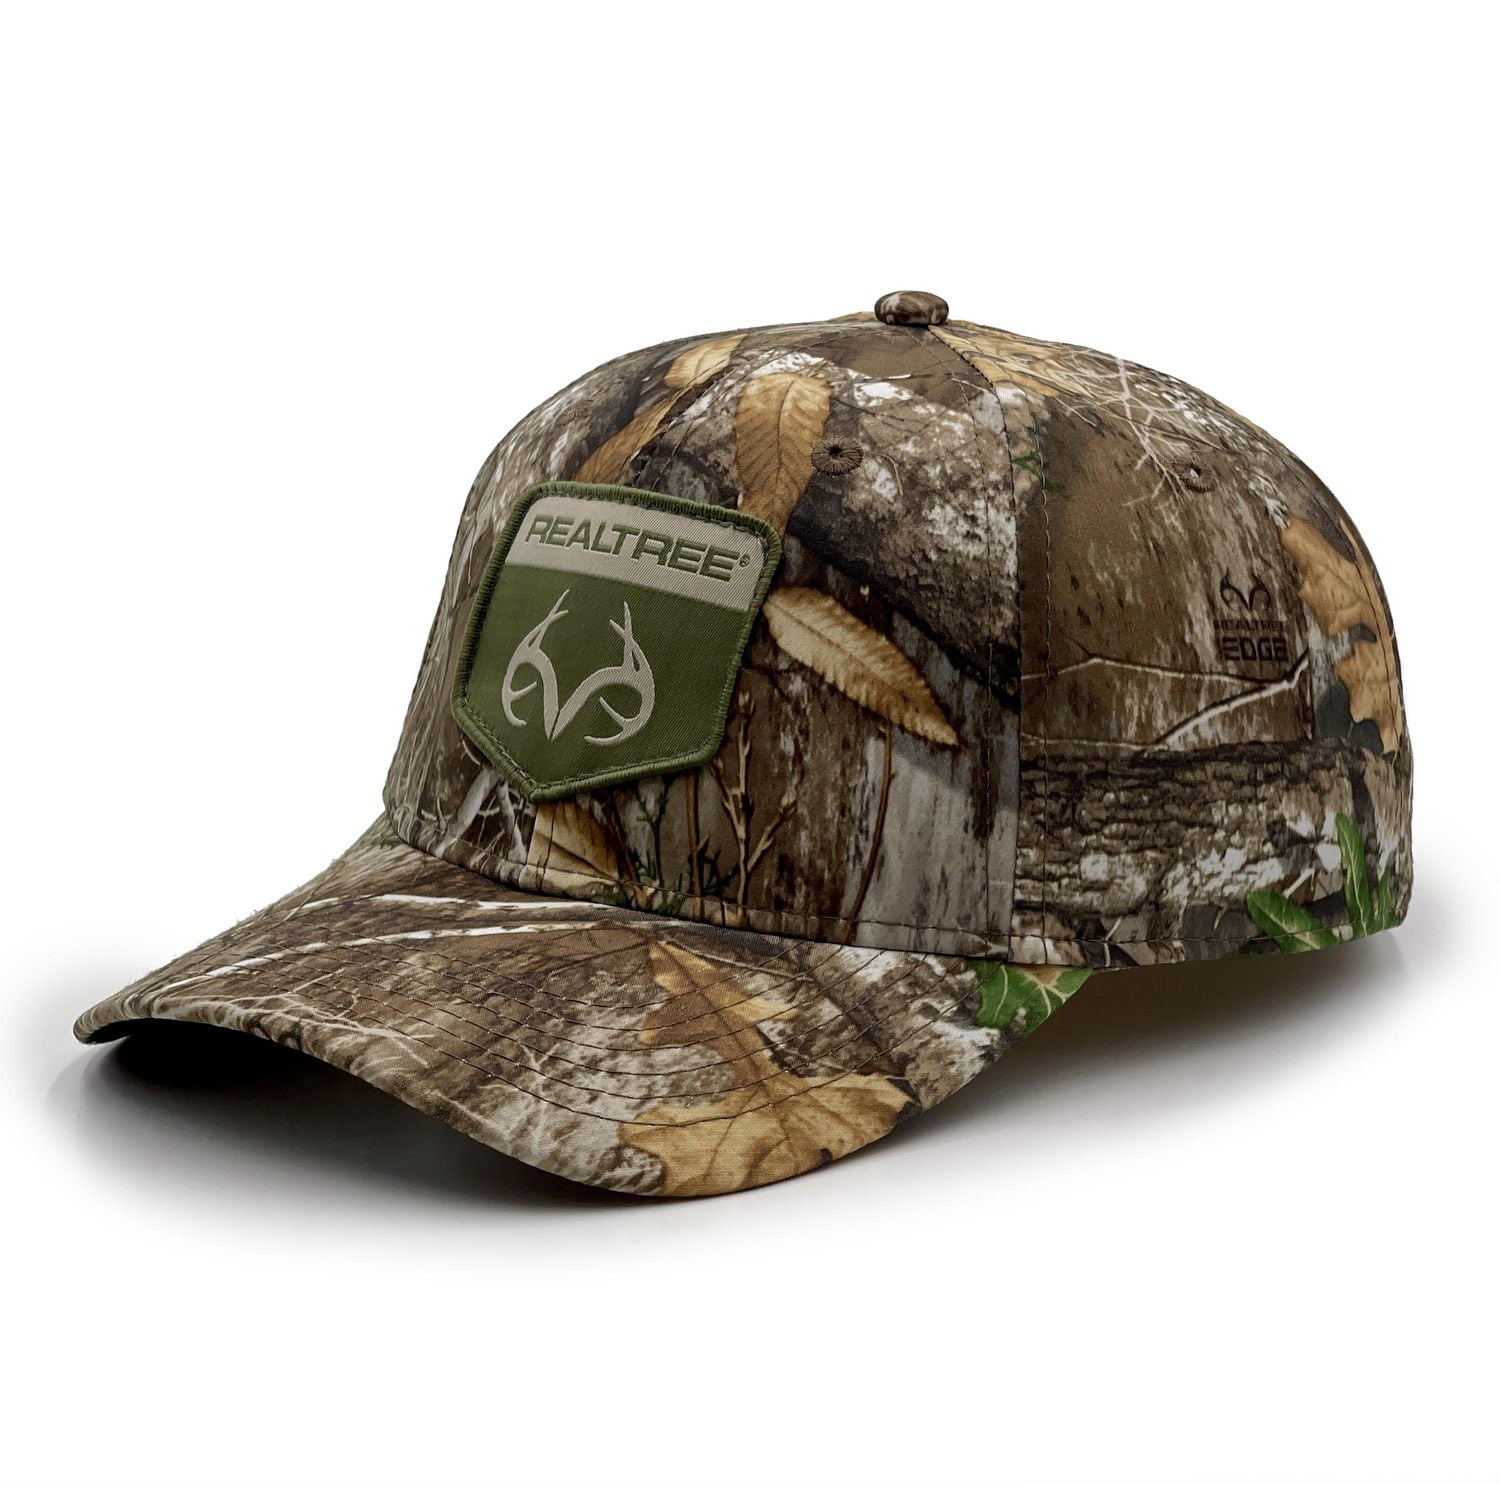 Realtree Hunting Structured Baseball Style Hat, Edge Camo, Large